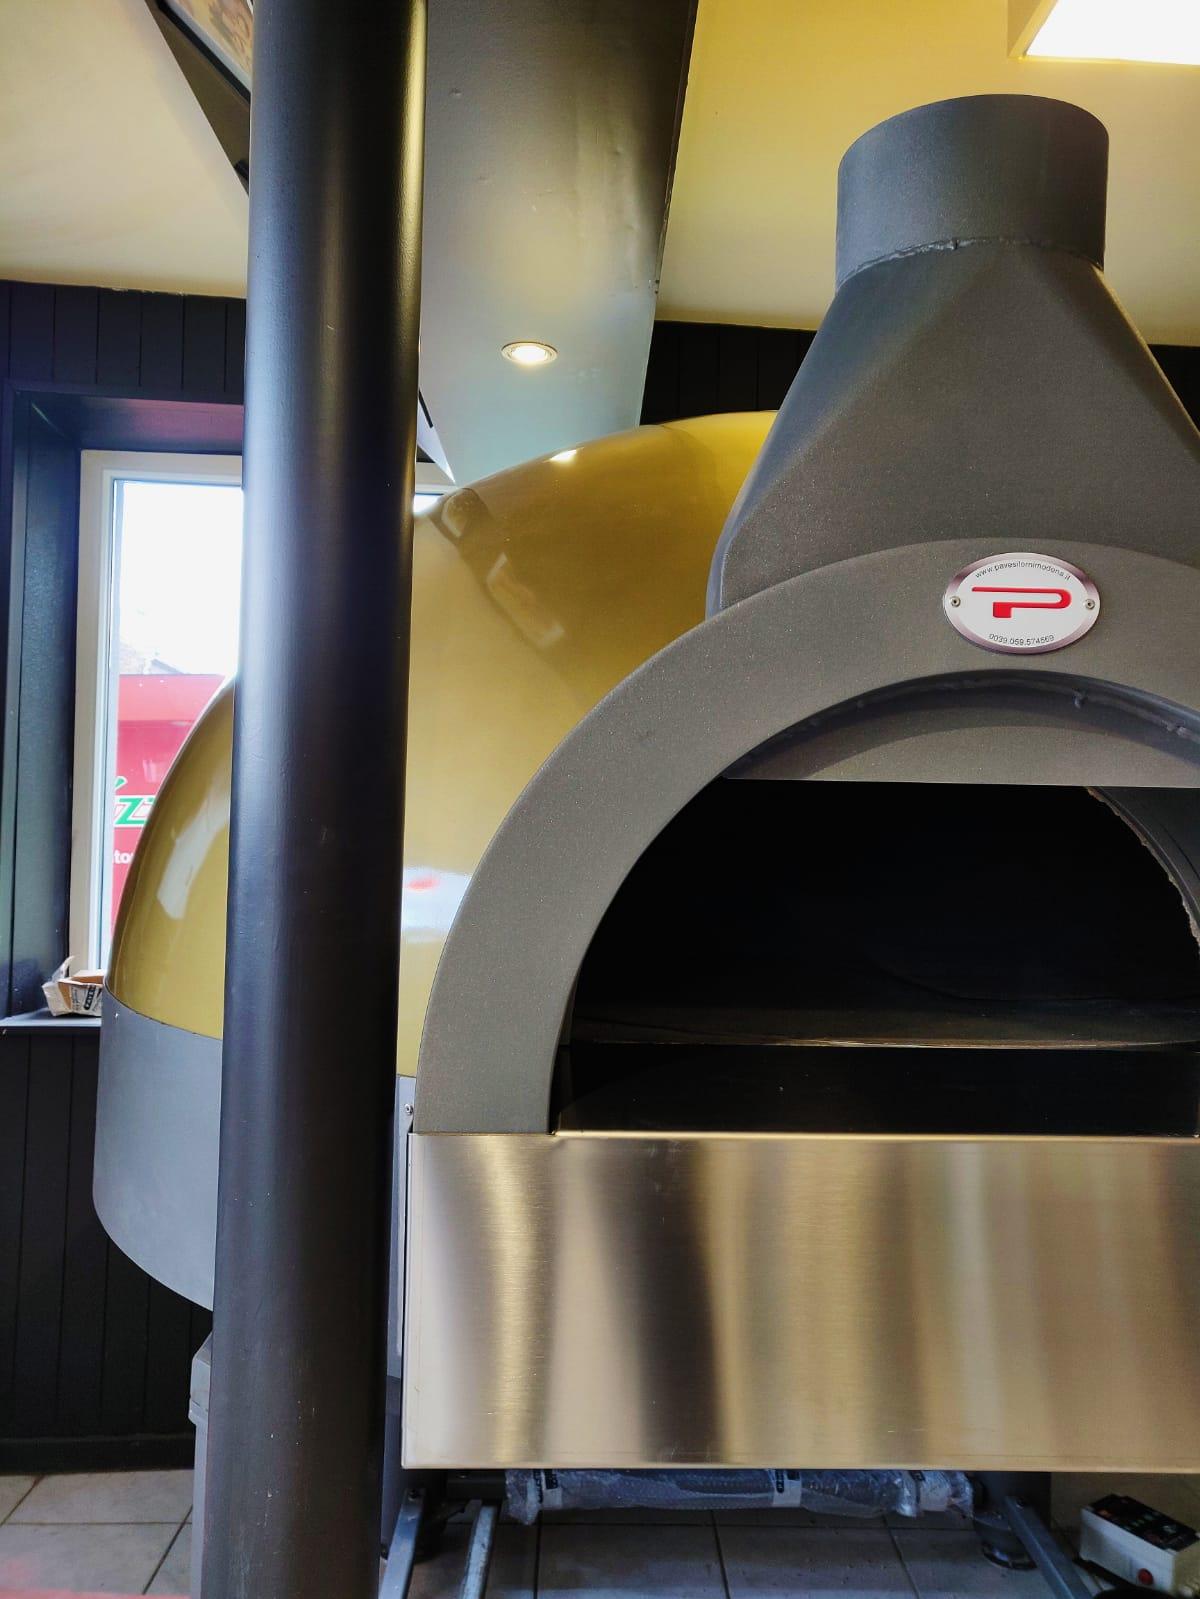 Rotating pizza oven